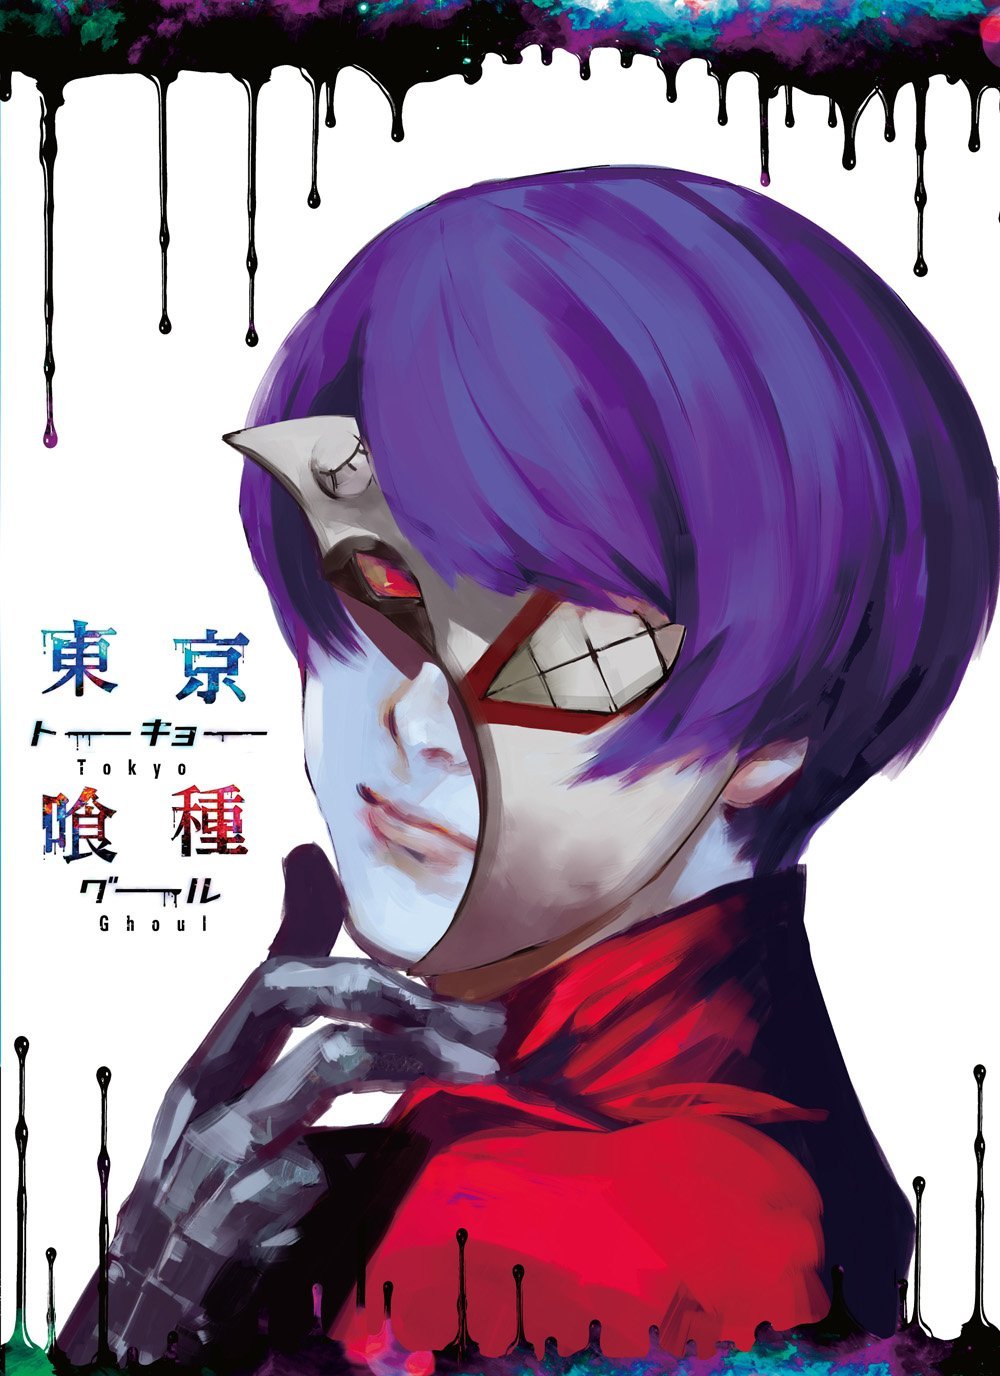 Tokyo Ghoul – Season 2 Collector's Edition Blu-ray Details